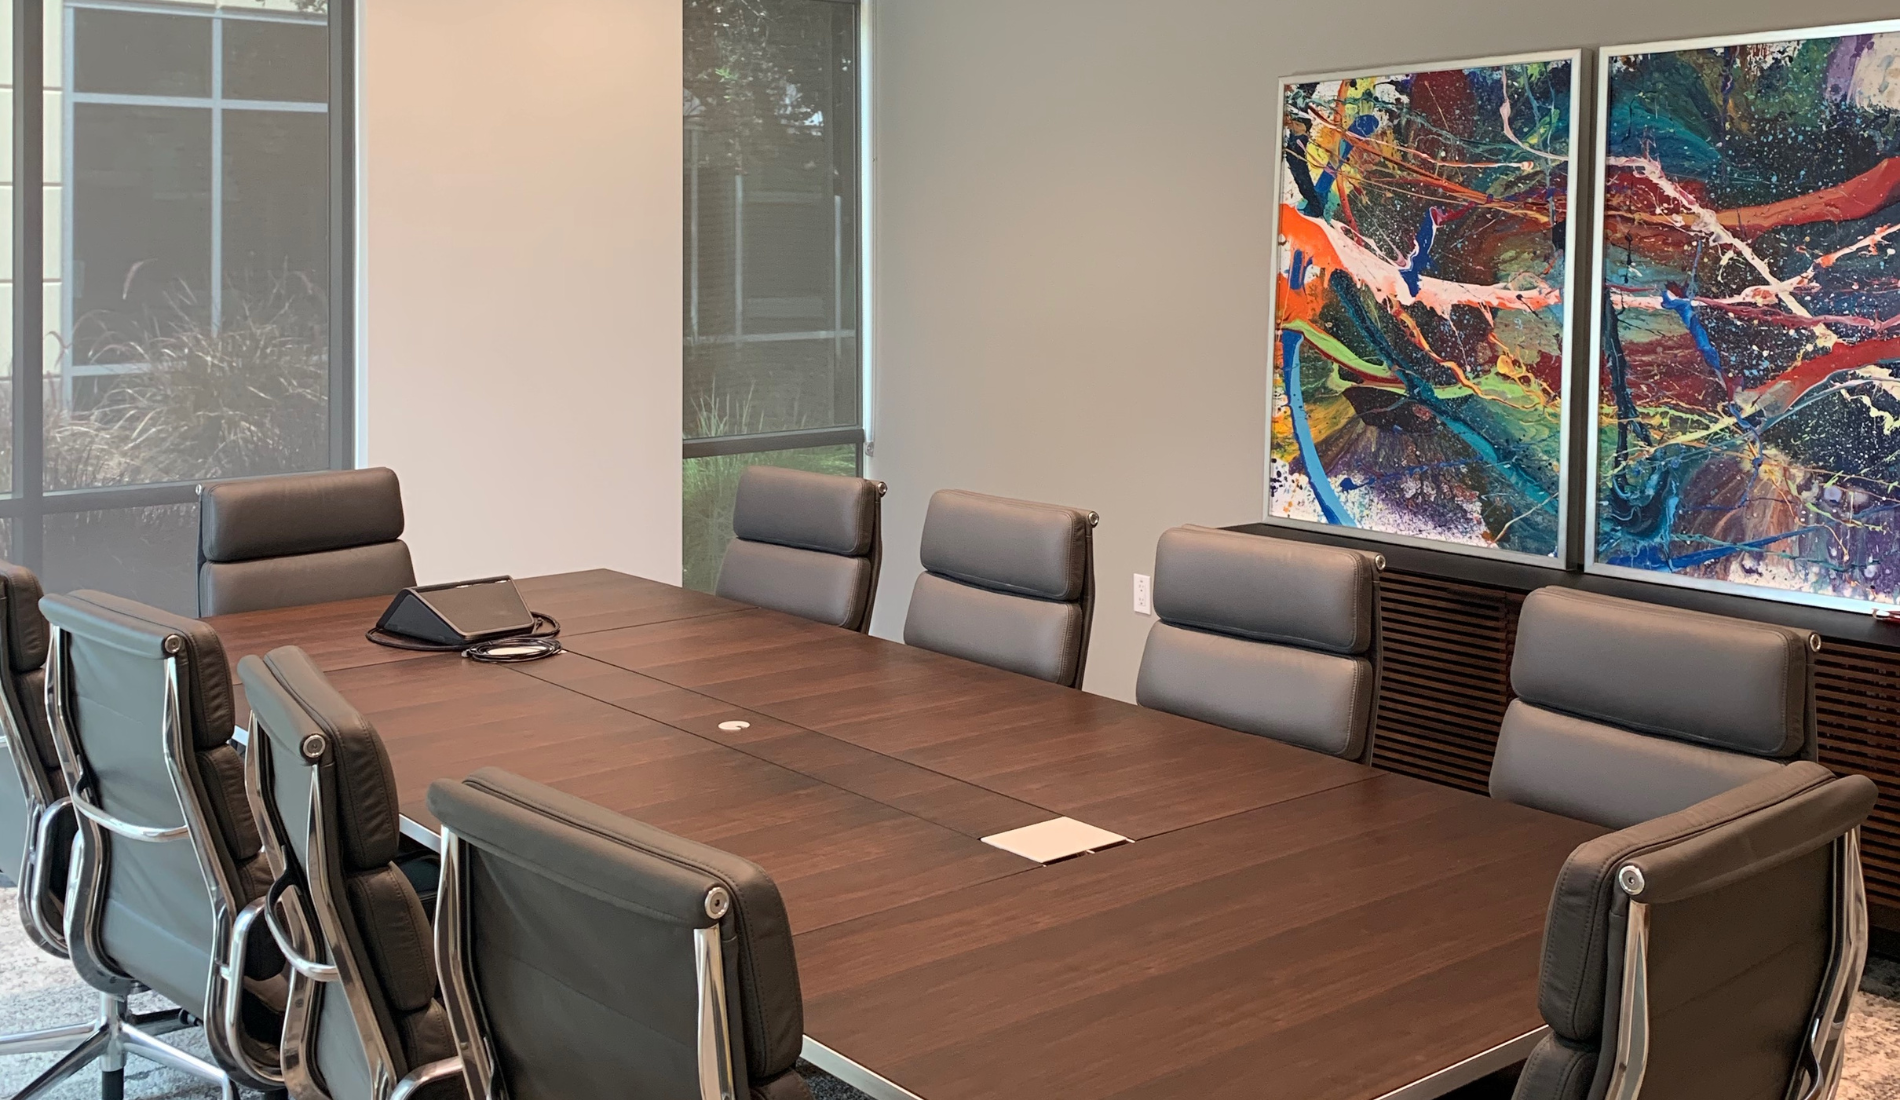 San Diego interior design conference room with seating, table, and art on wall